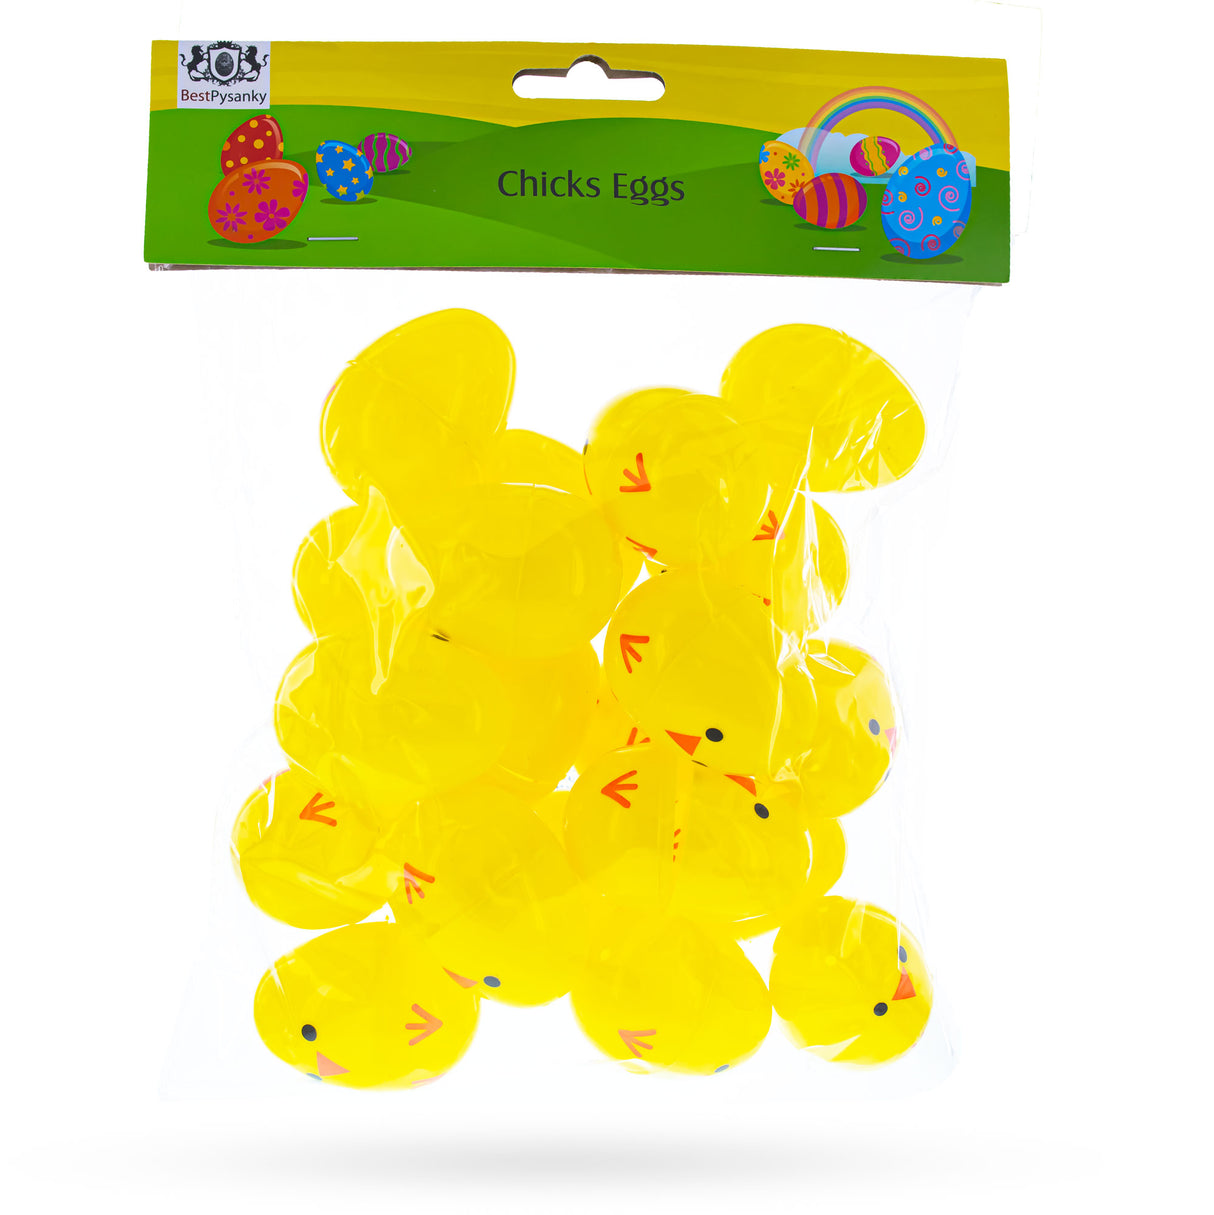 Cheerful Chicks: Set of 20 Chicks Fillable Plastic Easter Eggs 2.25 Inches ,dimensions in inches: 2.25 x 14 x 1.55